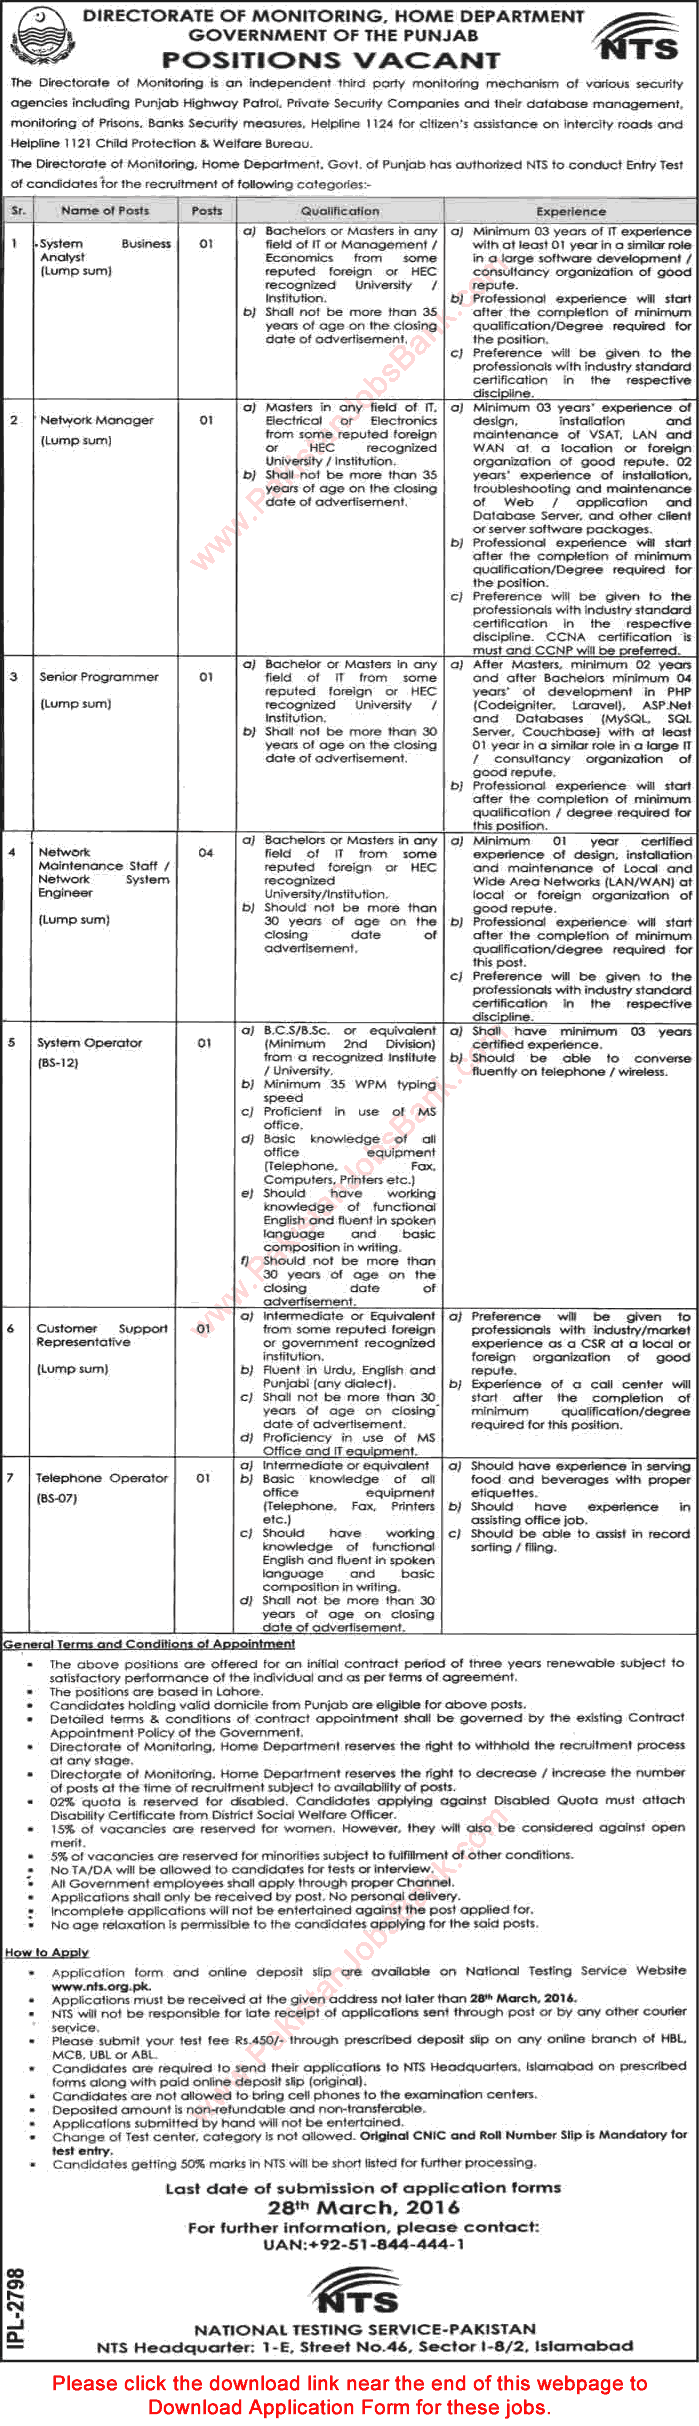 Home Department Punjab Jobs March 2016 NTS Application Form Network System Engineers, IT Staff & Others Latest